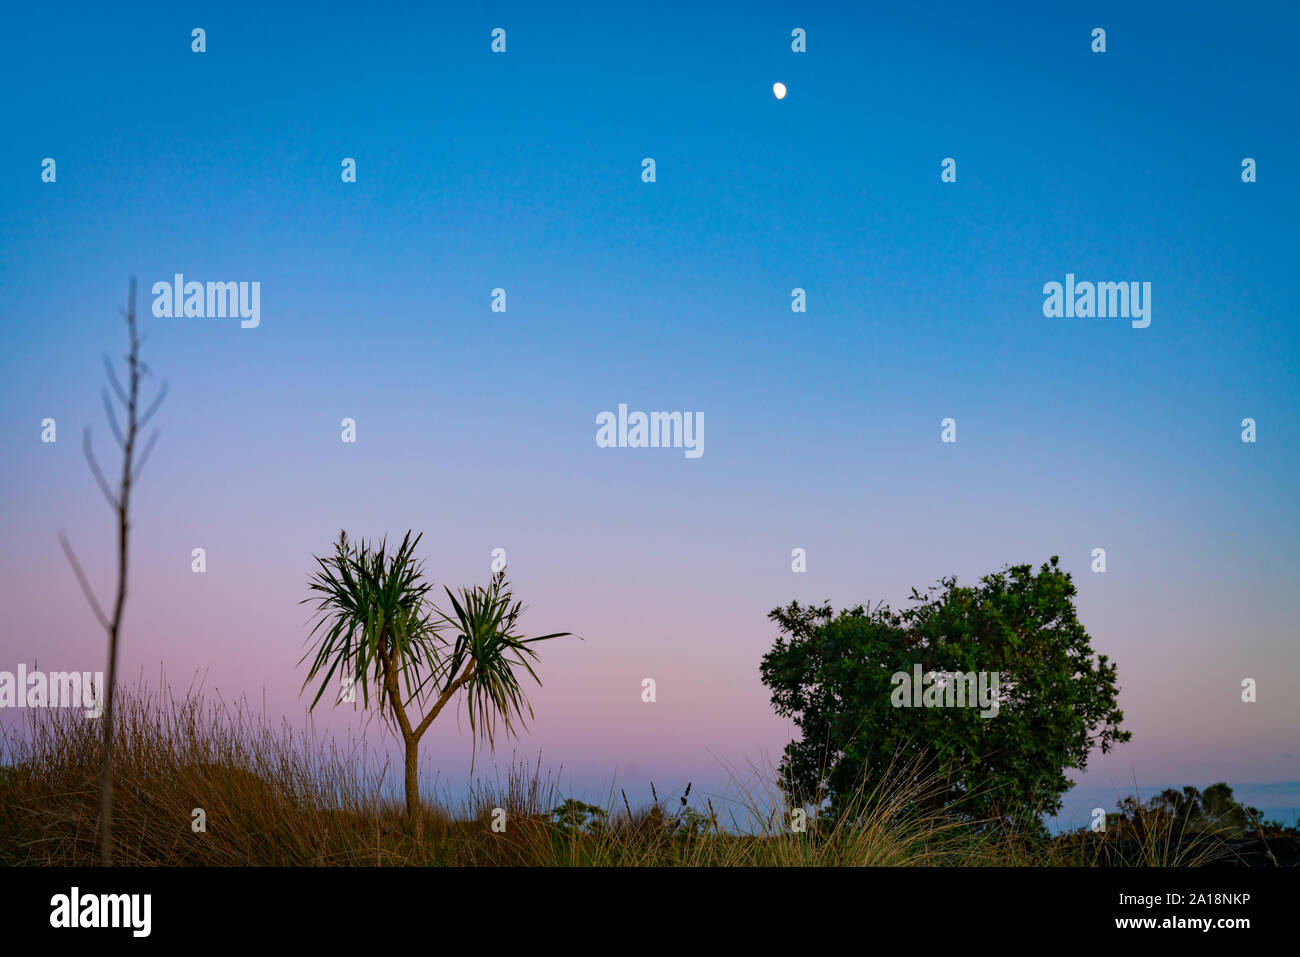 Dune landscape of at dawn with three specires of beach vegetation of ficina and the New Zealand cabbage tree standing out near small pohutukawa agains Stock Photo